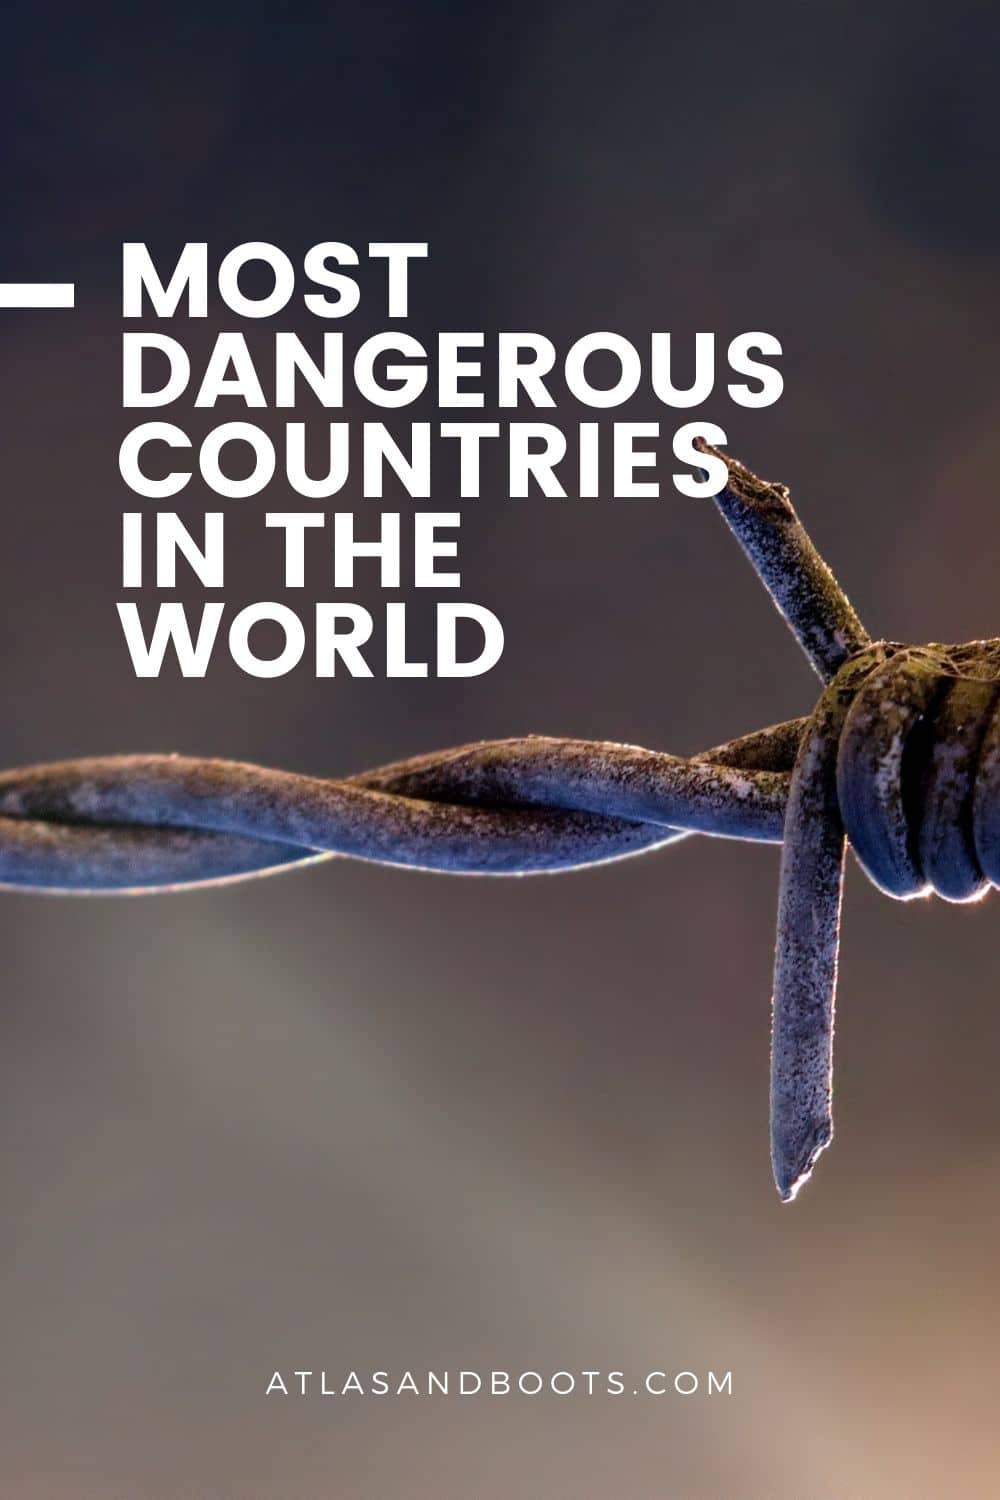 World in most country dangerous the Most Dangerous